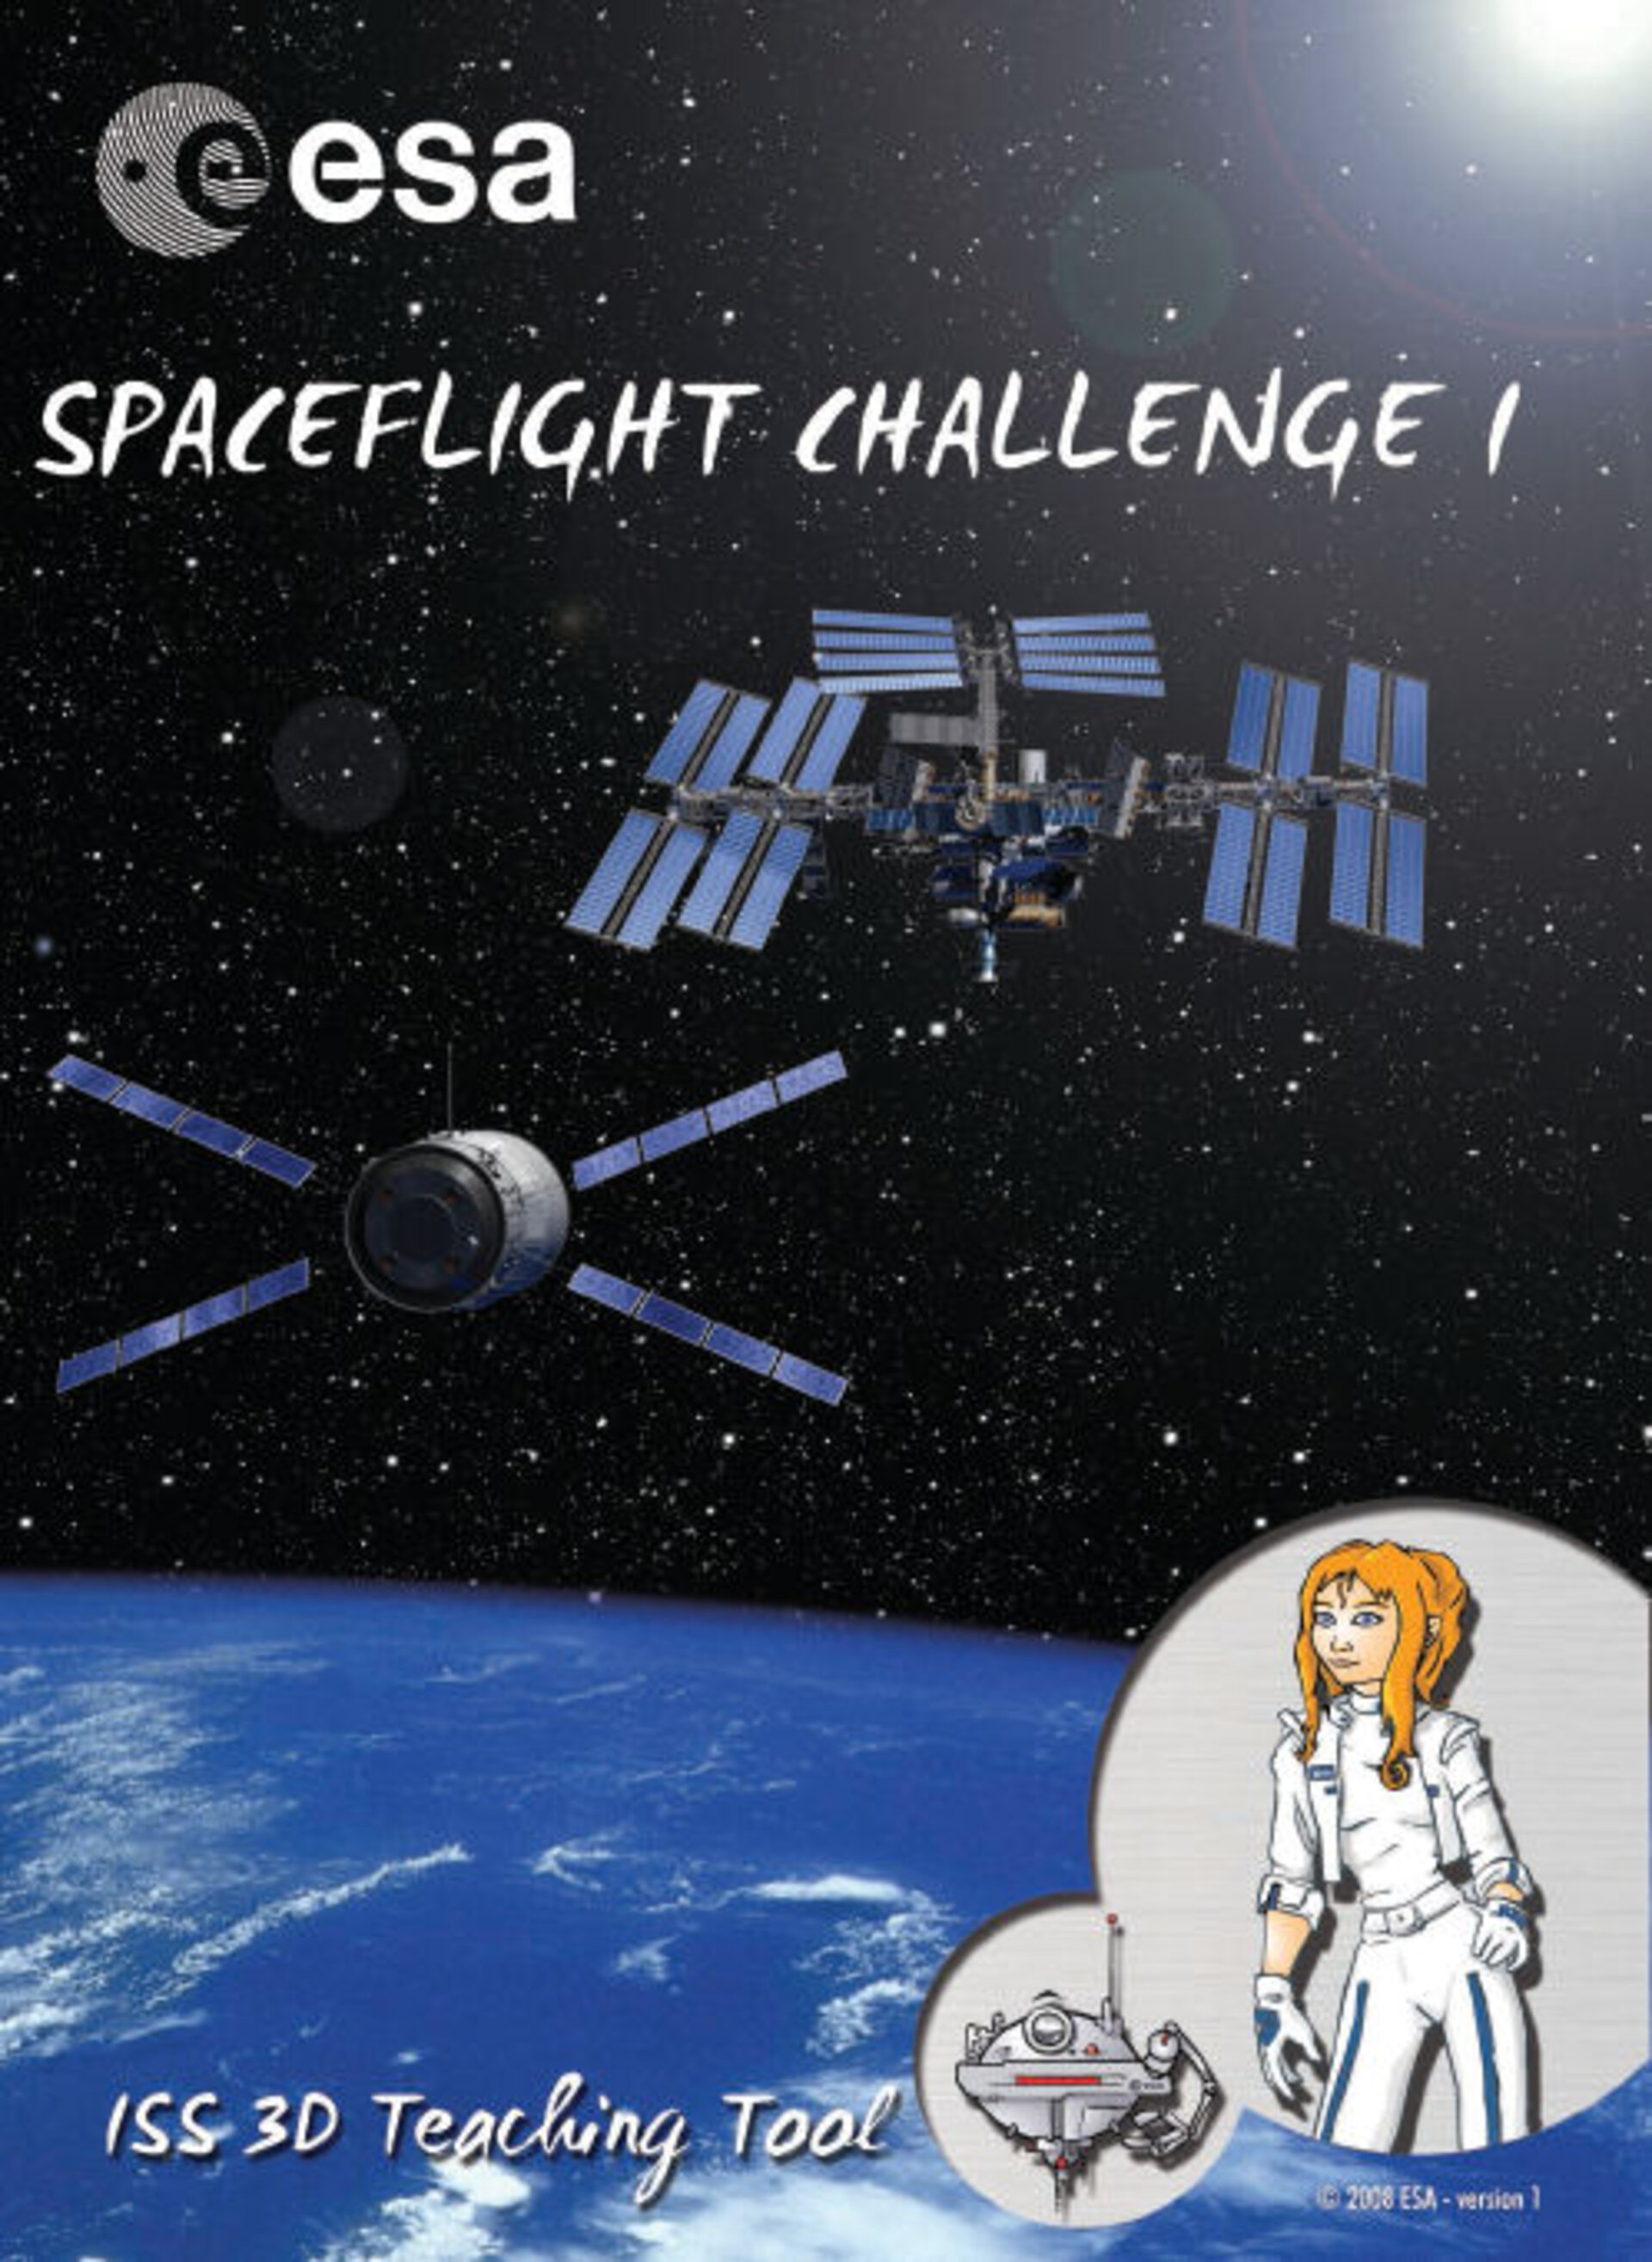 ISS 3D Teaching Tool - Space Challenge 1